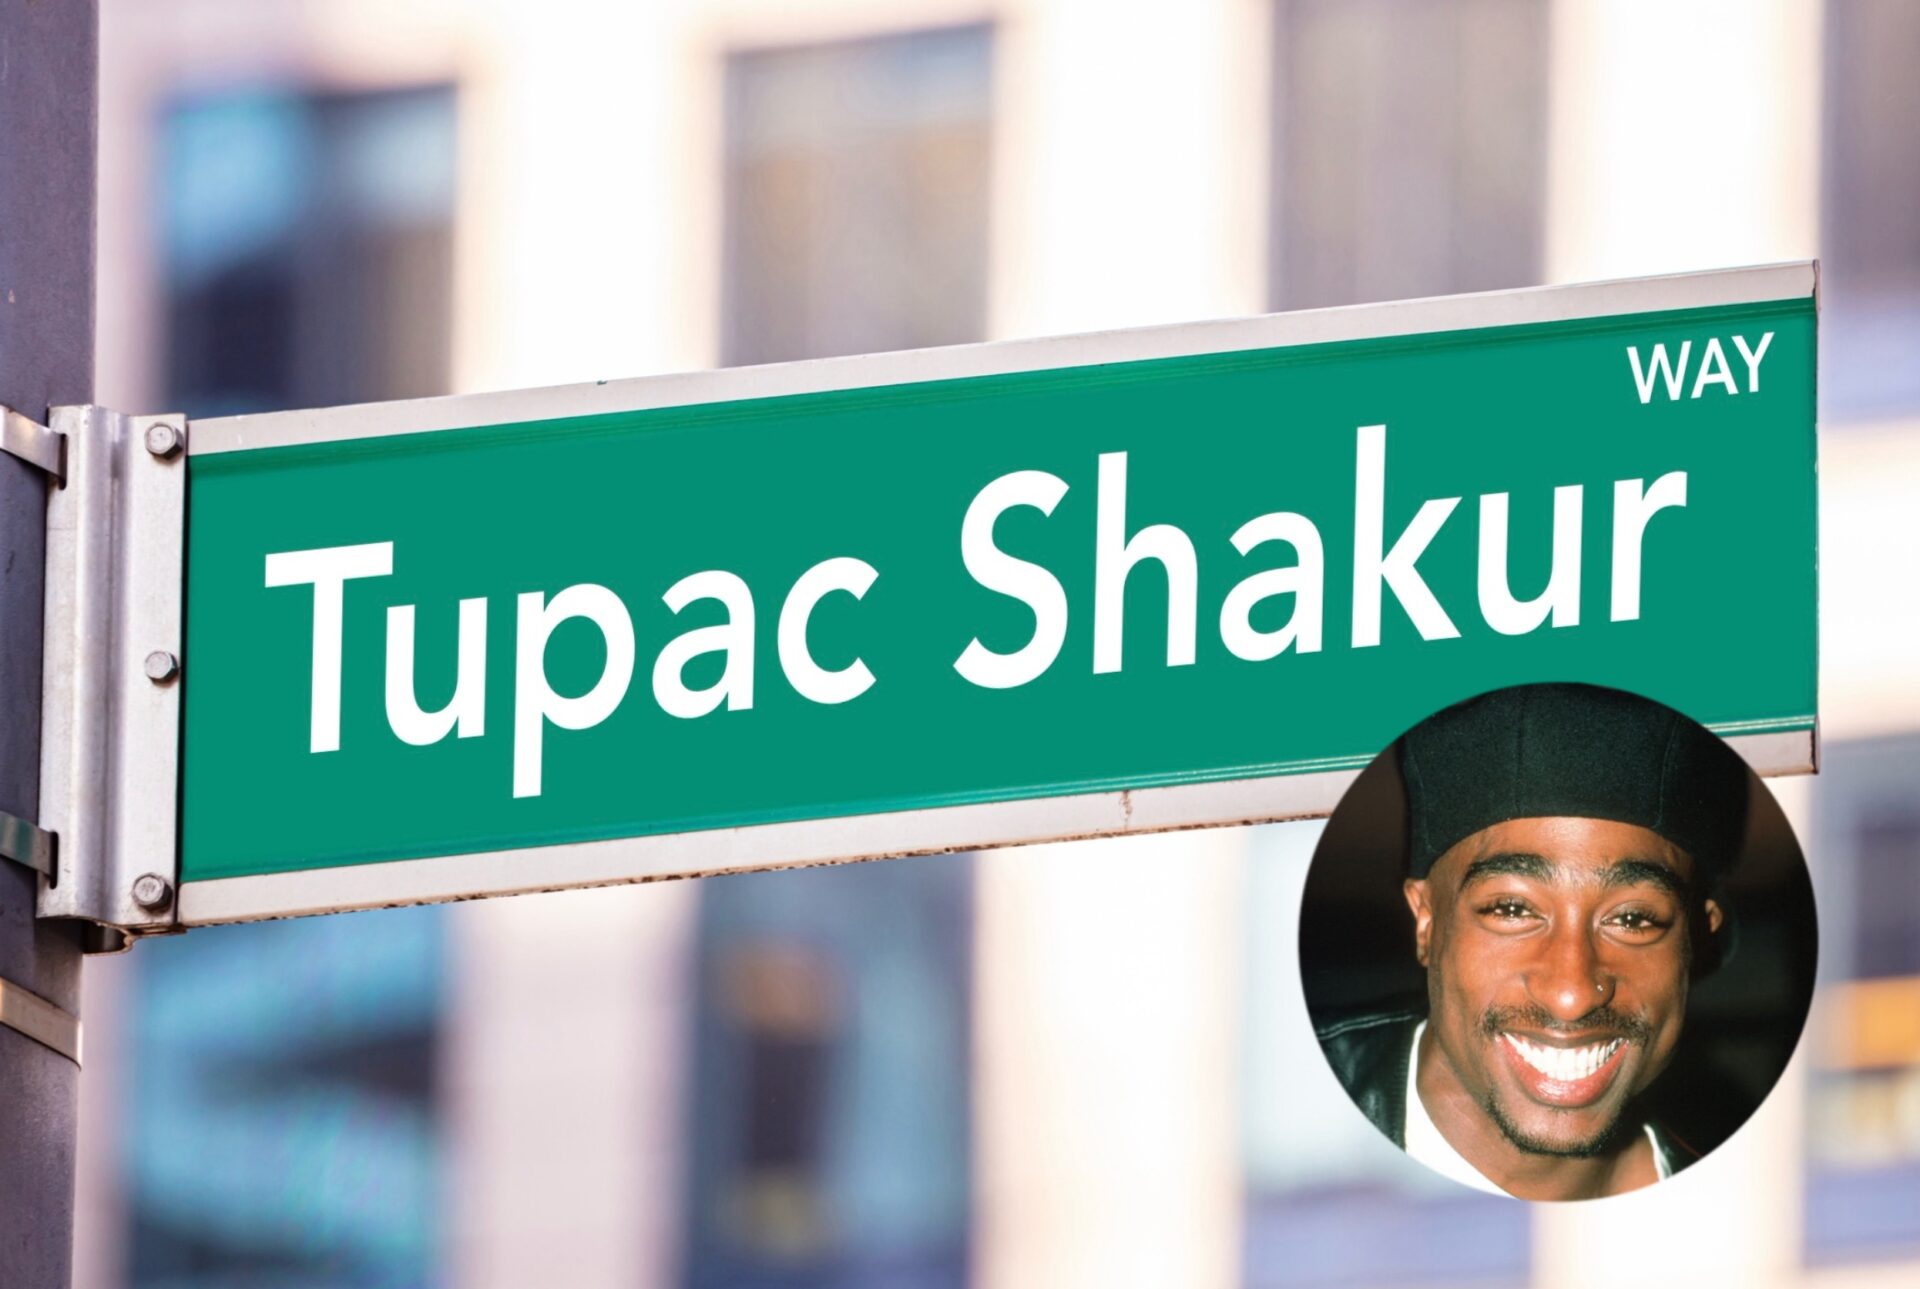 Tupac Shakur Way: Oakland renames stretch of MacArthur Boulevard in honor of rap icon